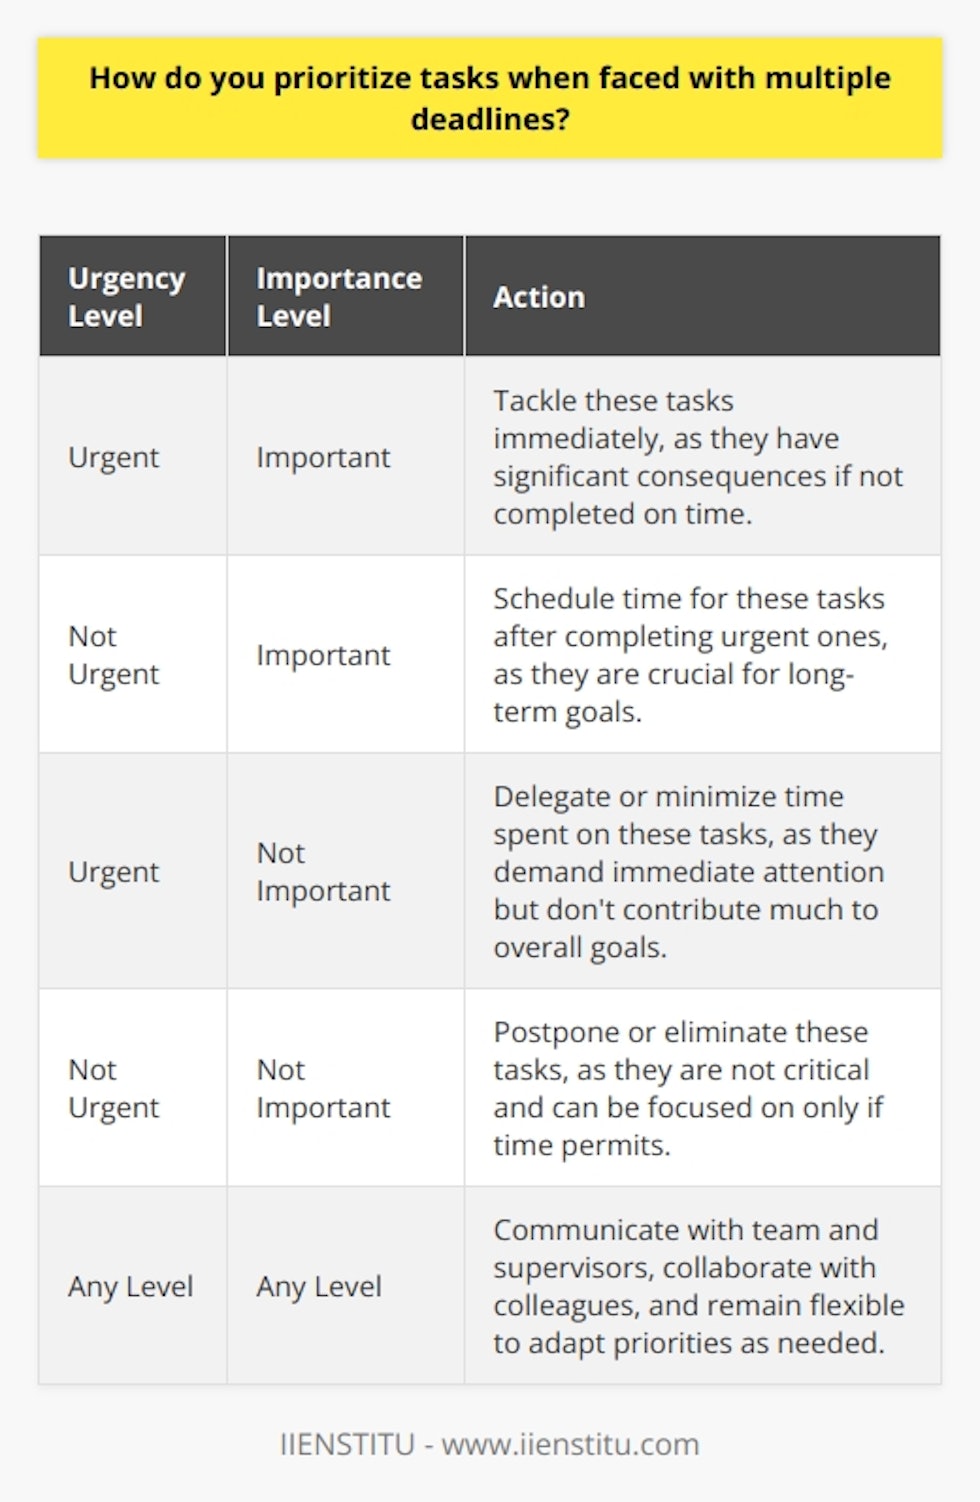 When faced with multiple deadlines, I prioritize tasks based on their urgency and importance. I start by making a list of all the tasks that need to be completed and their respective deadlines. Then, I categorize them based on their level of urgency and importance. Urgency and Importance Matrix I use the Eisenhower Matrix to categorize tasks into four quadrants: 1. Urgent and Important These tasks require immediate attention and have significant consequences if not completed on time. I tackle these tasks first. 2. Important but Not Urgent These tasks are crucial for long-term goals but dont have pressing deadlines. I schedule time for these tasks after completing urgent ones. 3. Urgent but Not Important These tasks demand immediate attention but dont contribute much to overall goals. I try to delegate or minimize time spent on these tasks. 4. Neither Urgent nor Important These tasks are not critical and can be postponed or eliminated. I focus on them only if time permits. Communication and Collaboration I believe in open communication with my team and supervisors. If I feel overwhelmed or need guidance, I reach out to them. Collaborating with colleagues can also help in distributing workload and meeting deadlines efficiently. Flexibility and Adaptability Despite careful planning, unexpected challenges can arise. I remain flexible and adapt my priorities as needed. If a new urgent task comes up, I re-evaluate my list and make necessary adjustments. By following this approach, Ive been able to consistently meet deadlines and deliver quality work. I remember a time when I had three projects due within a week. By prioritizing based on urgency and importance, communicating with my team, and staying flexible, I managed to complete all three projects successfully and received positive feedback from my supervisors.